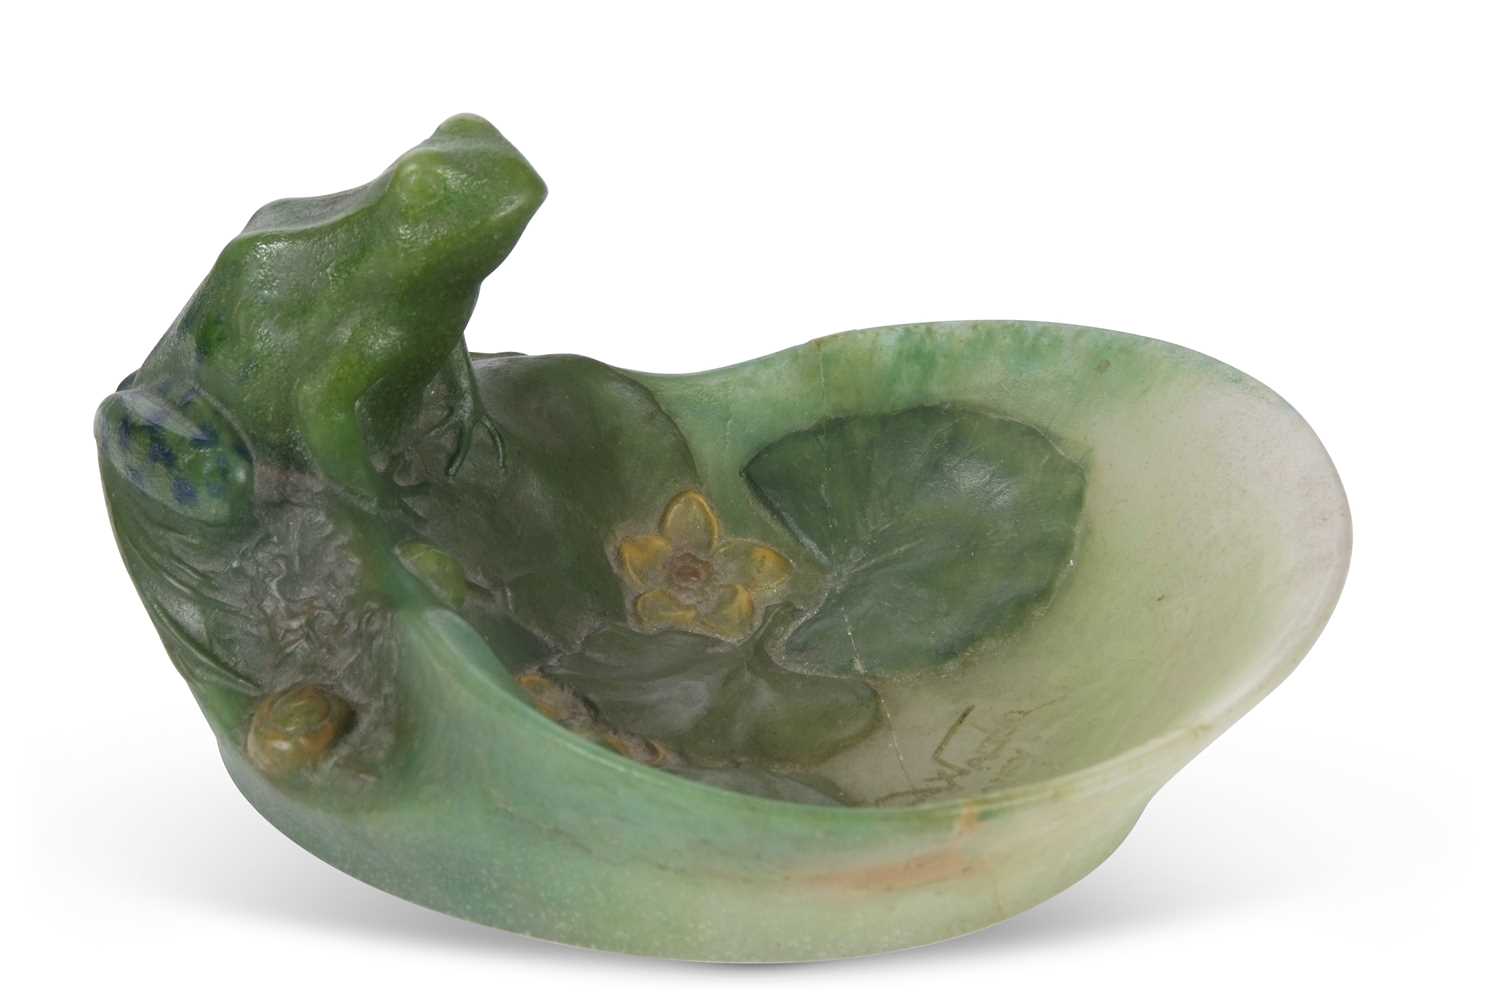 An Almeric Walter pate de verre dish c1920 designed by Henri Berge modelled as a green coloured frog